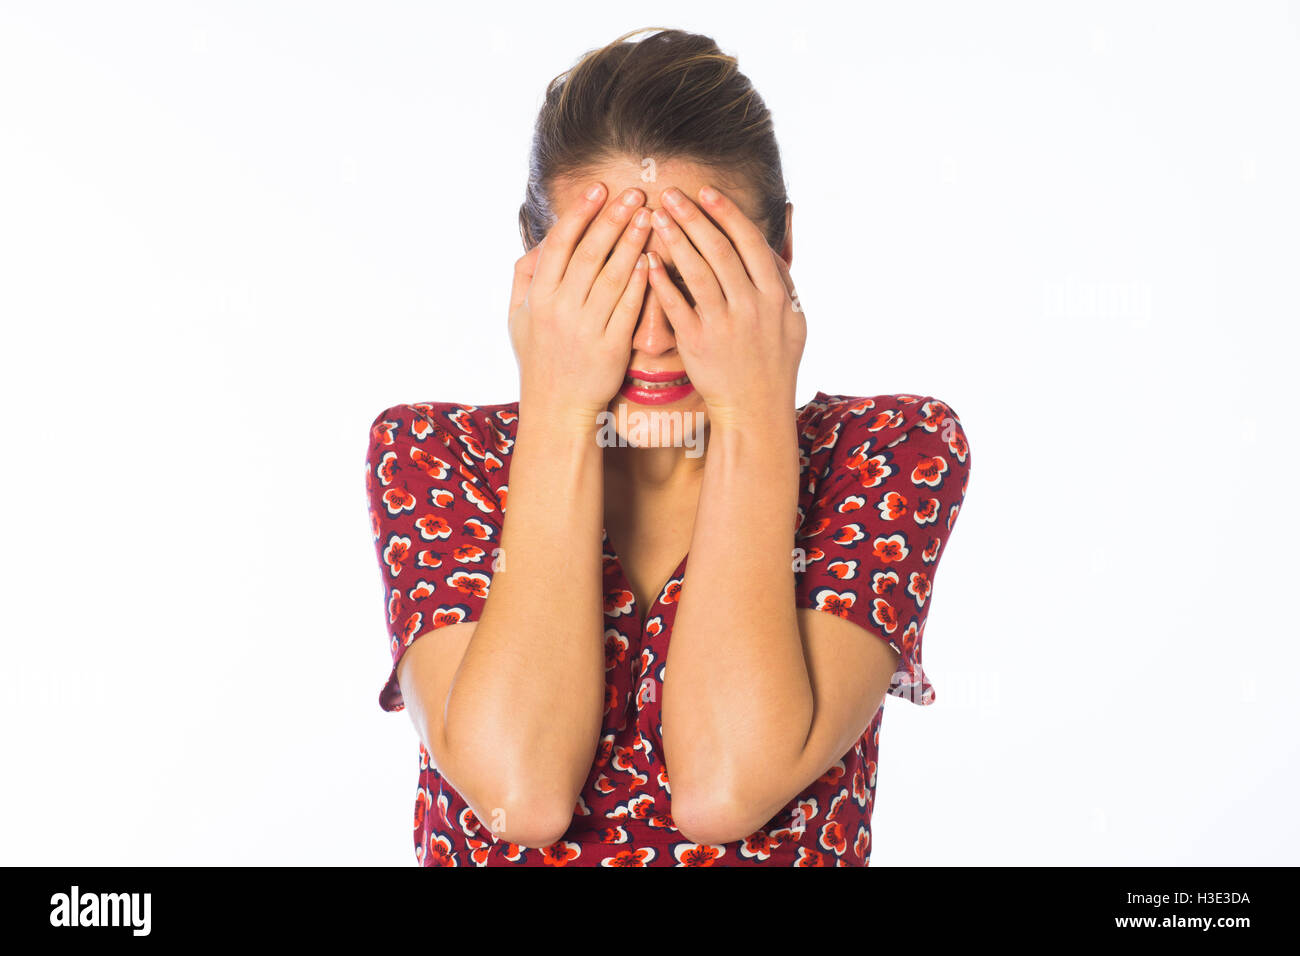 Scared young woman hiding face with hands against a white background Stock Photo